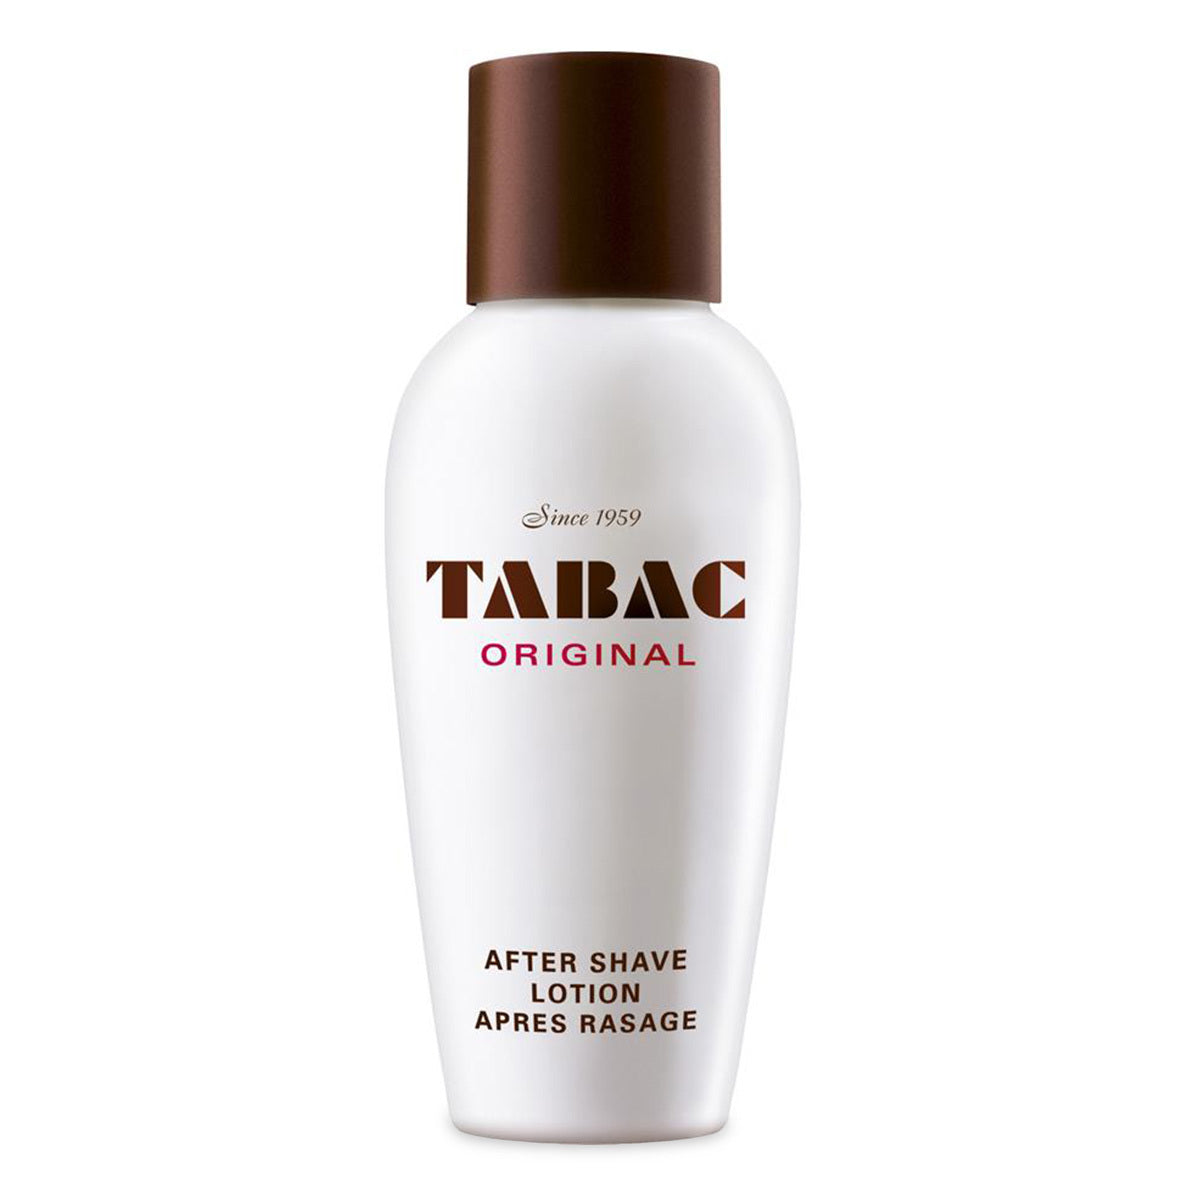 Primary image of Tabac Original After Shave